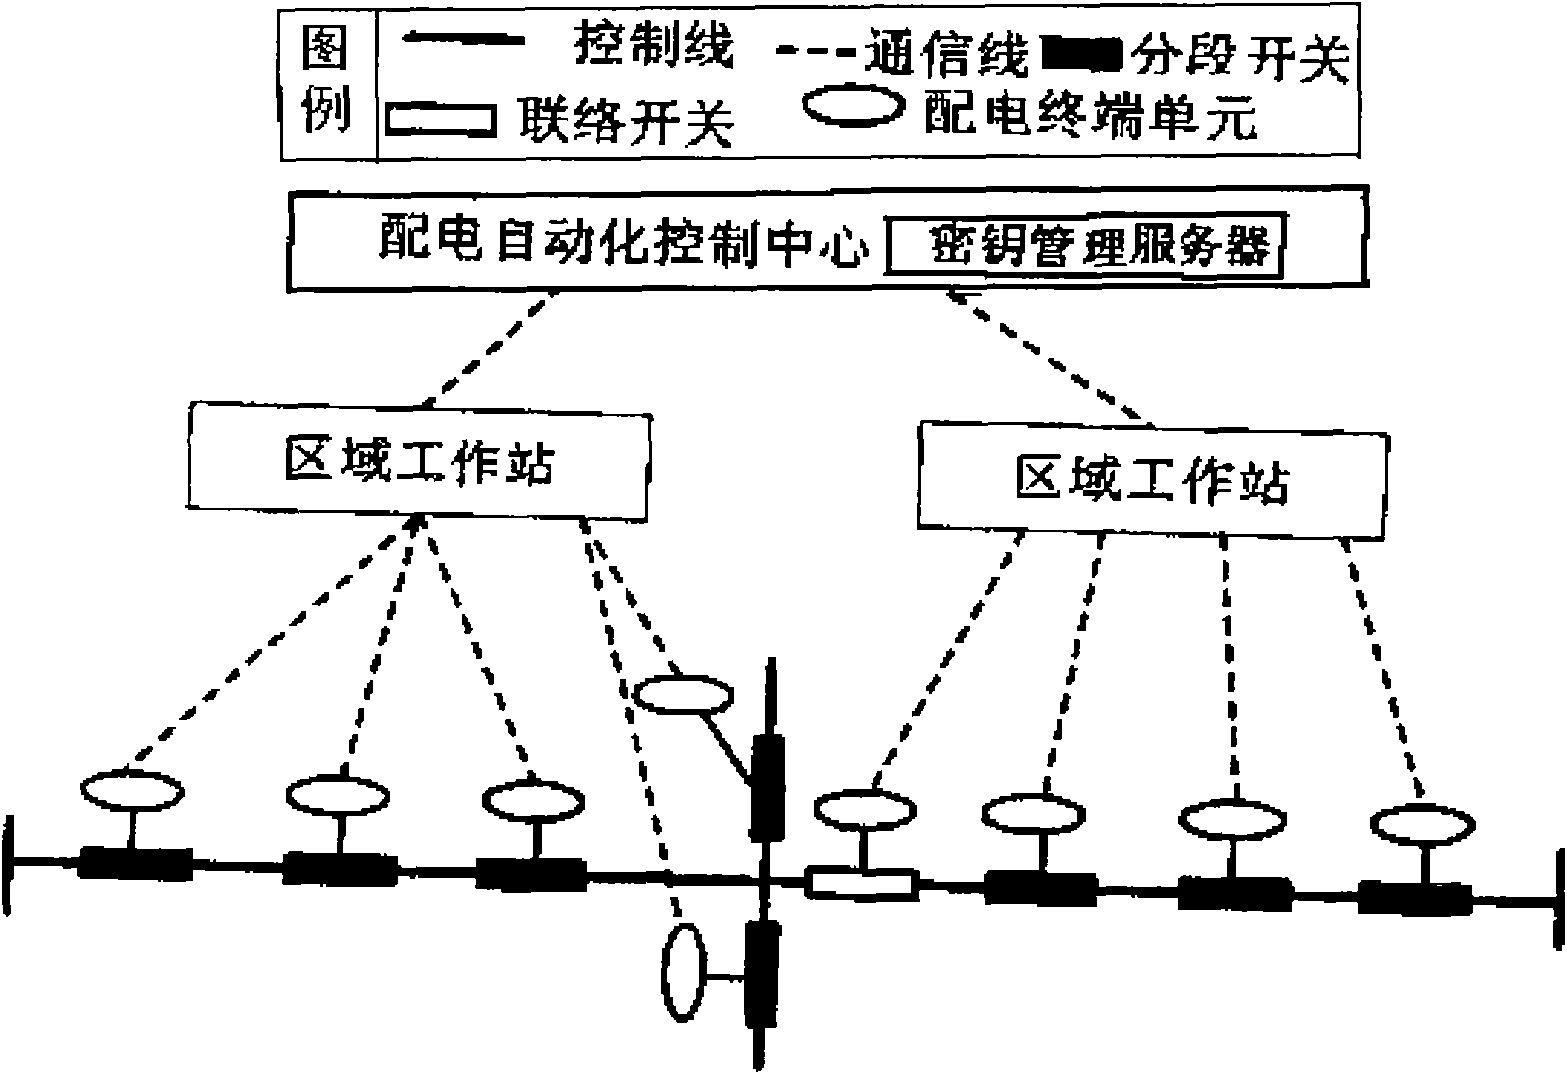 Device access authentication method of distribution network automated communication system based on ID